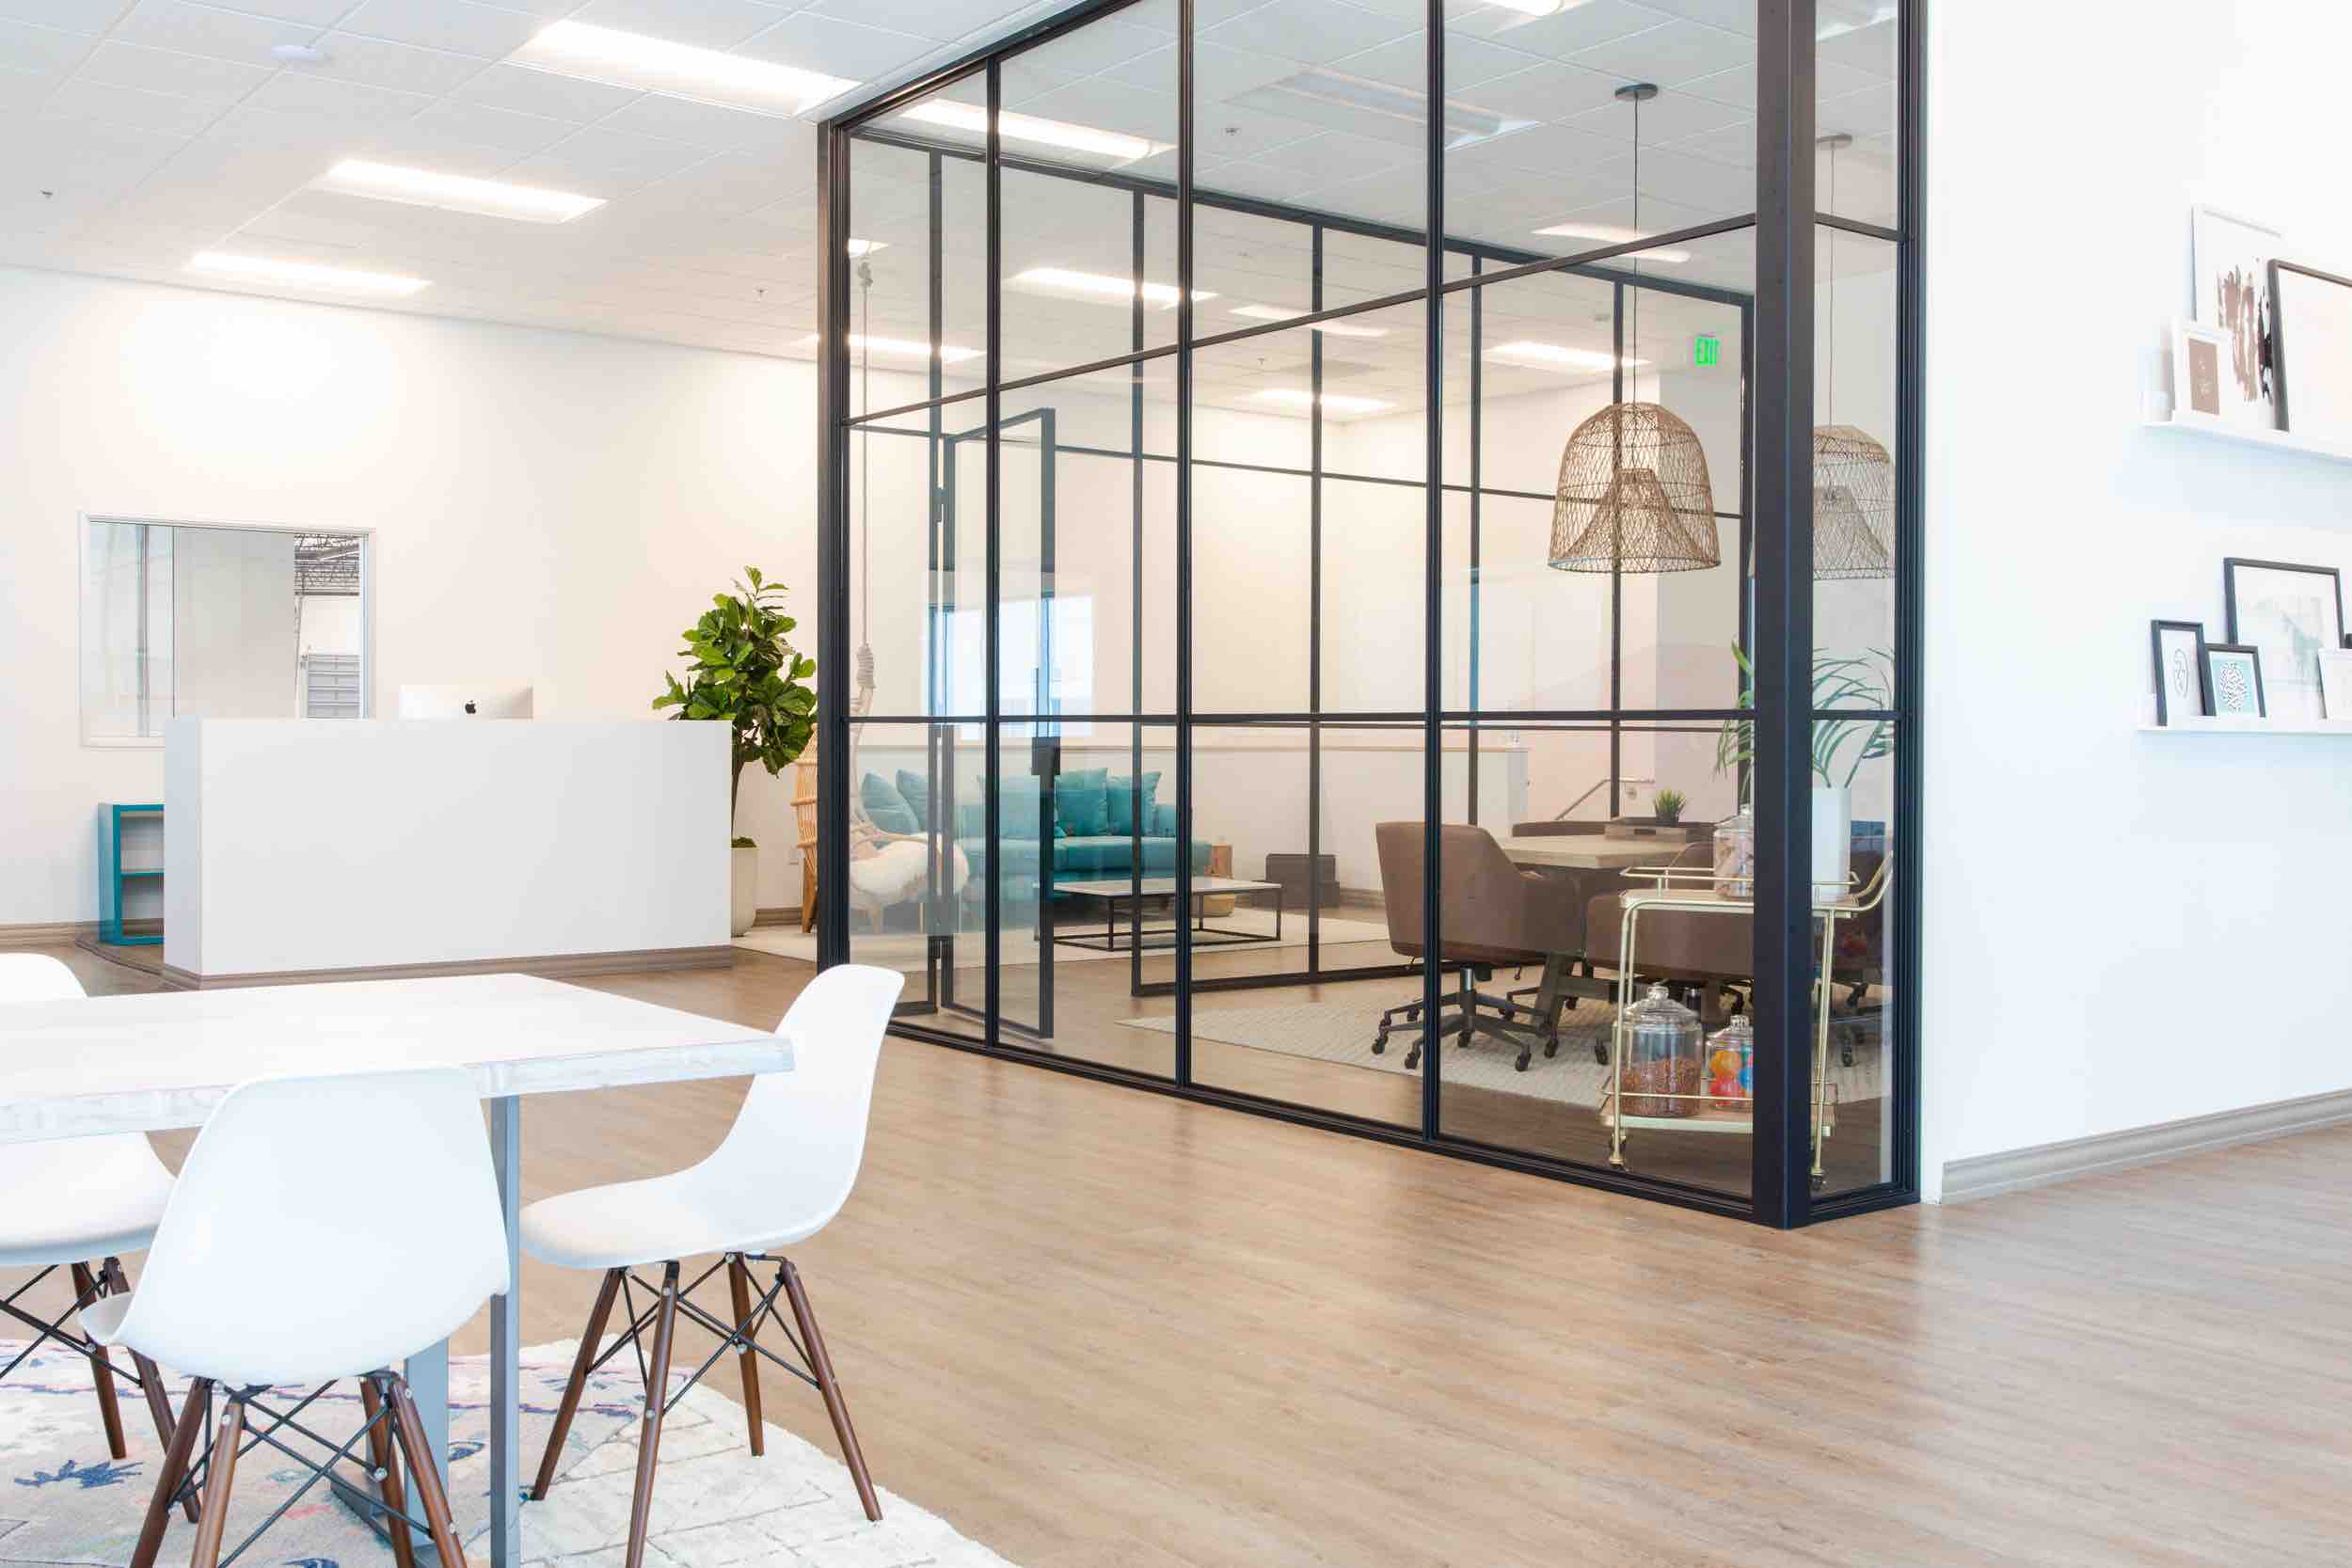 Uneebo Office Interior Design Gives Startup Offices What